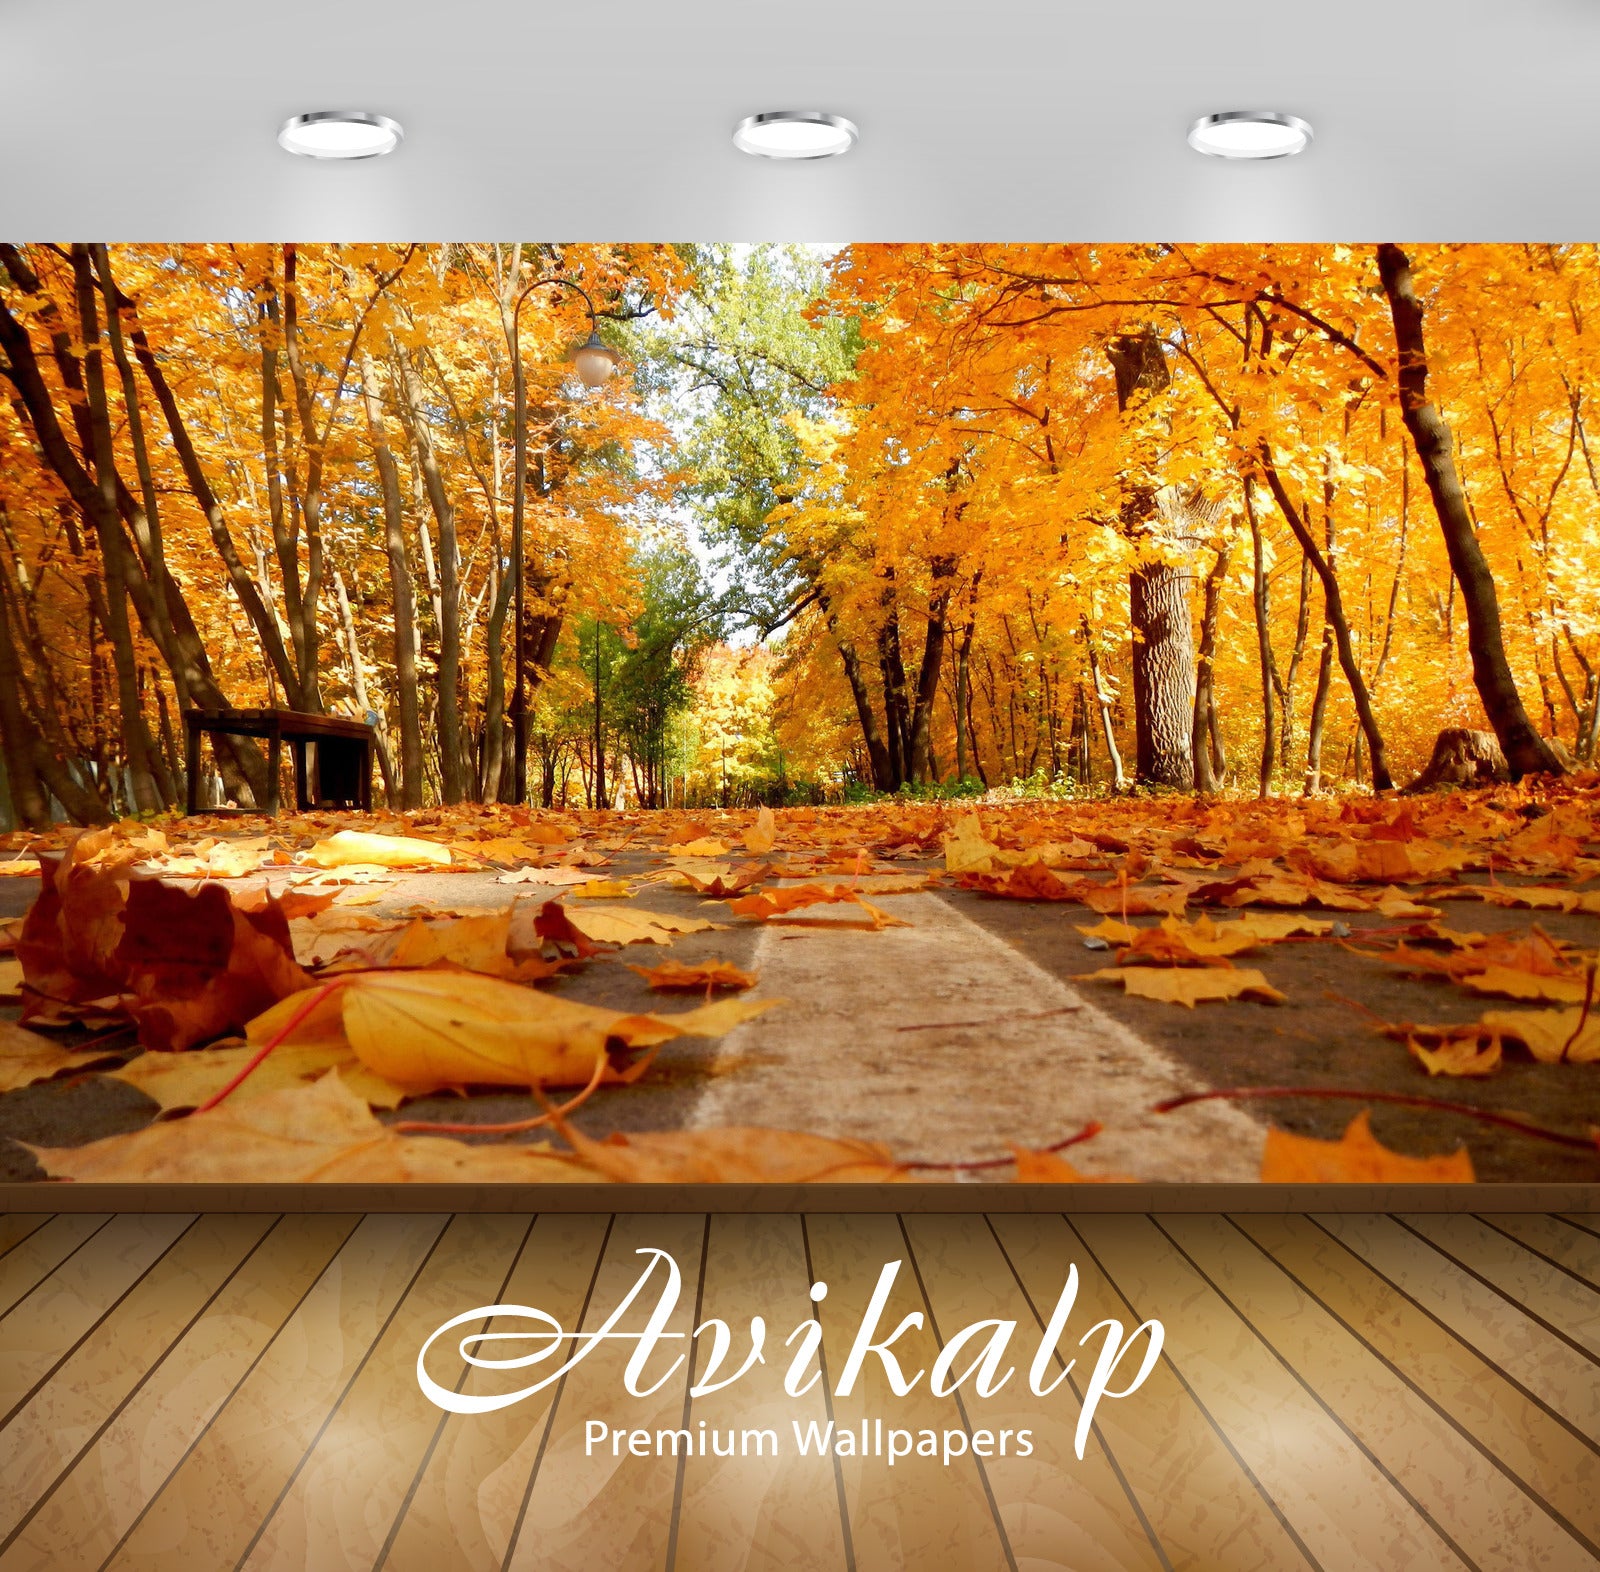 Avikalp Exclusive Awi5152 Autumn Leaves On The Pavement Nature Full HD Wallpapers for Living room, H